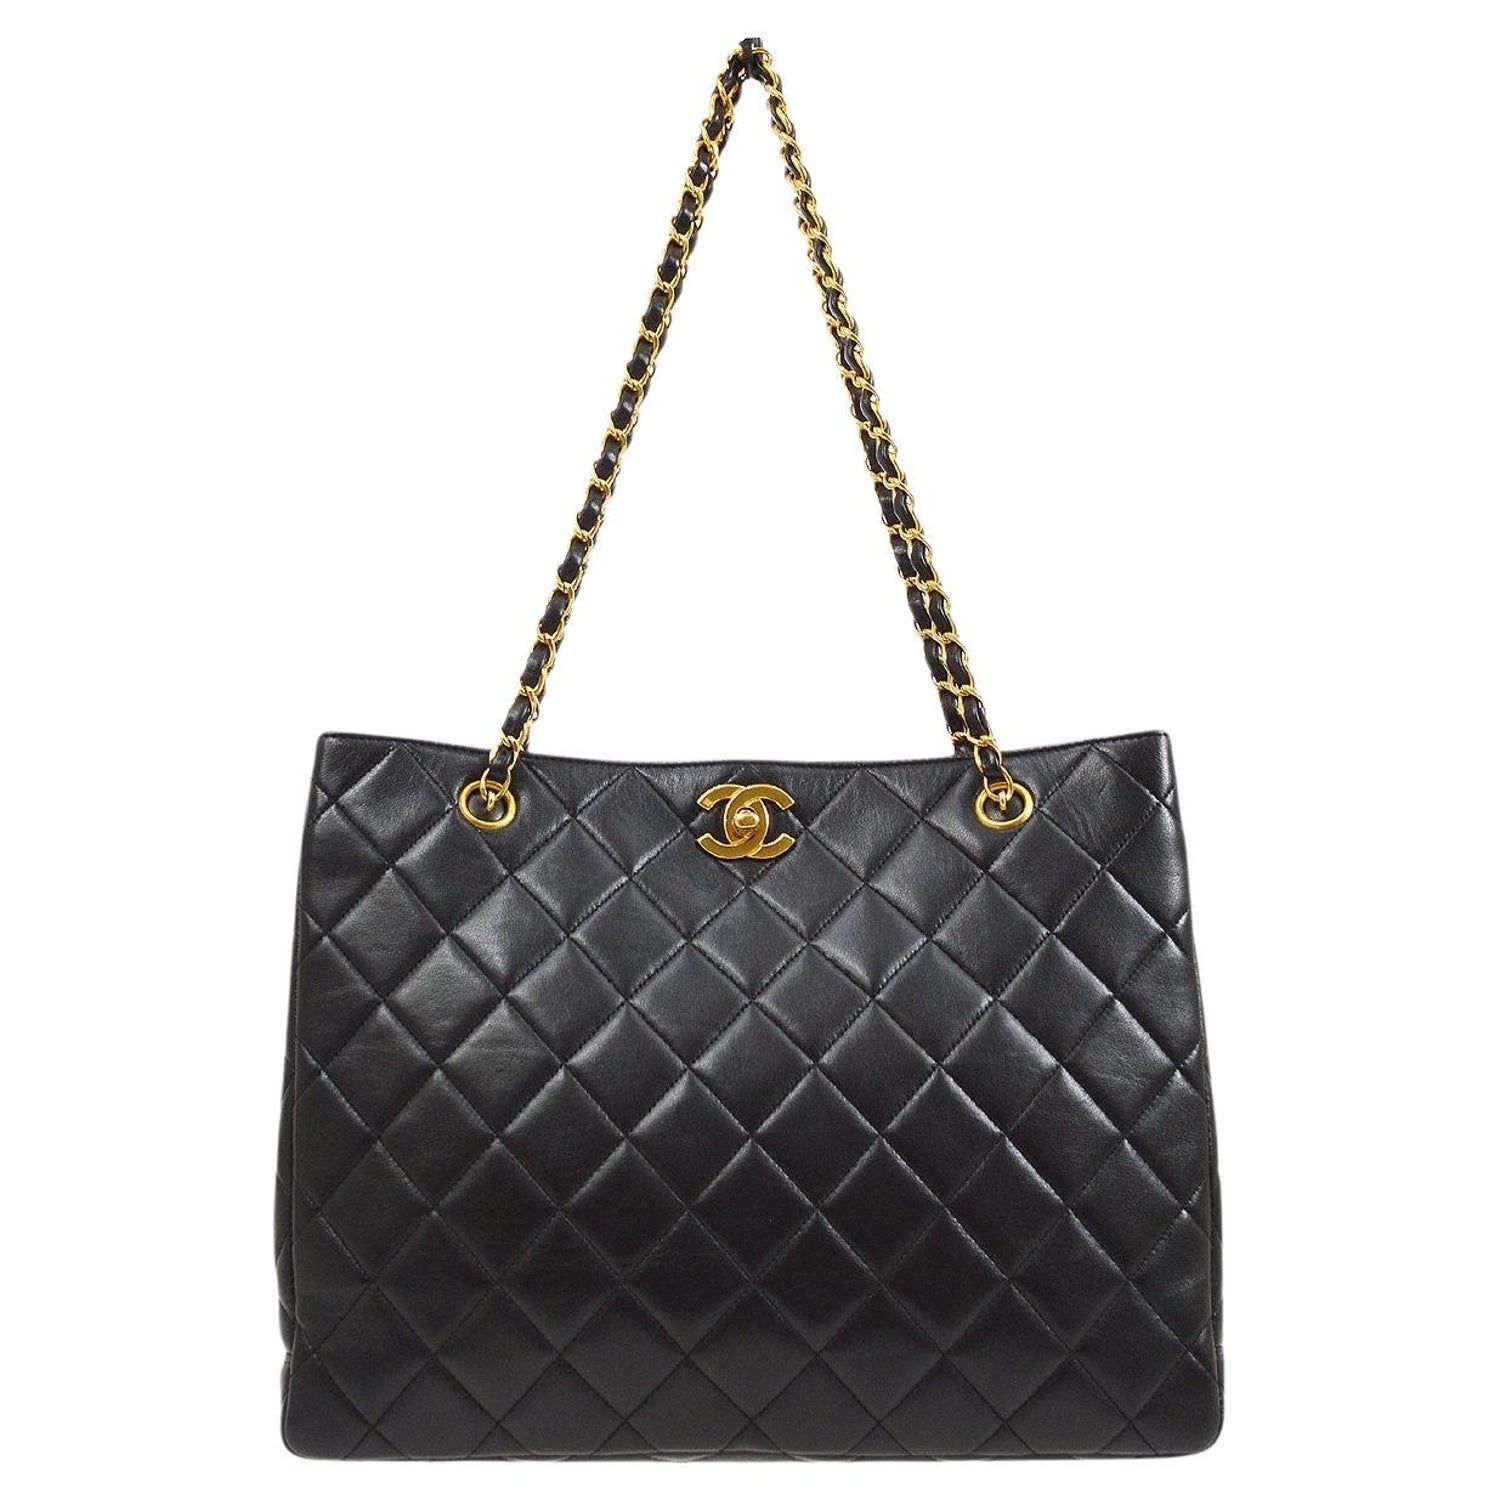 CHANEL CC Black Lambskin Quilted Gold e Evening Carryall Shoulder Tote Bag